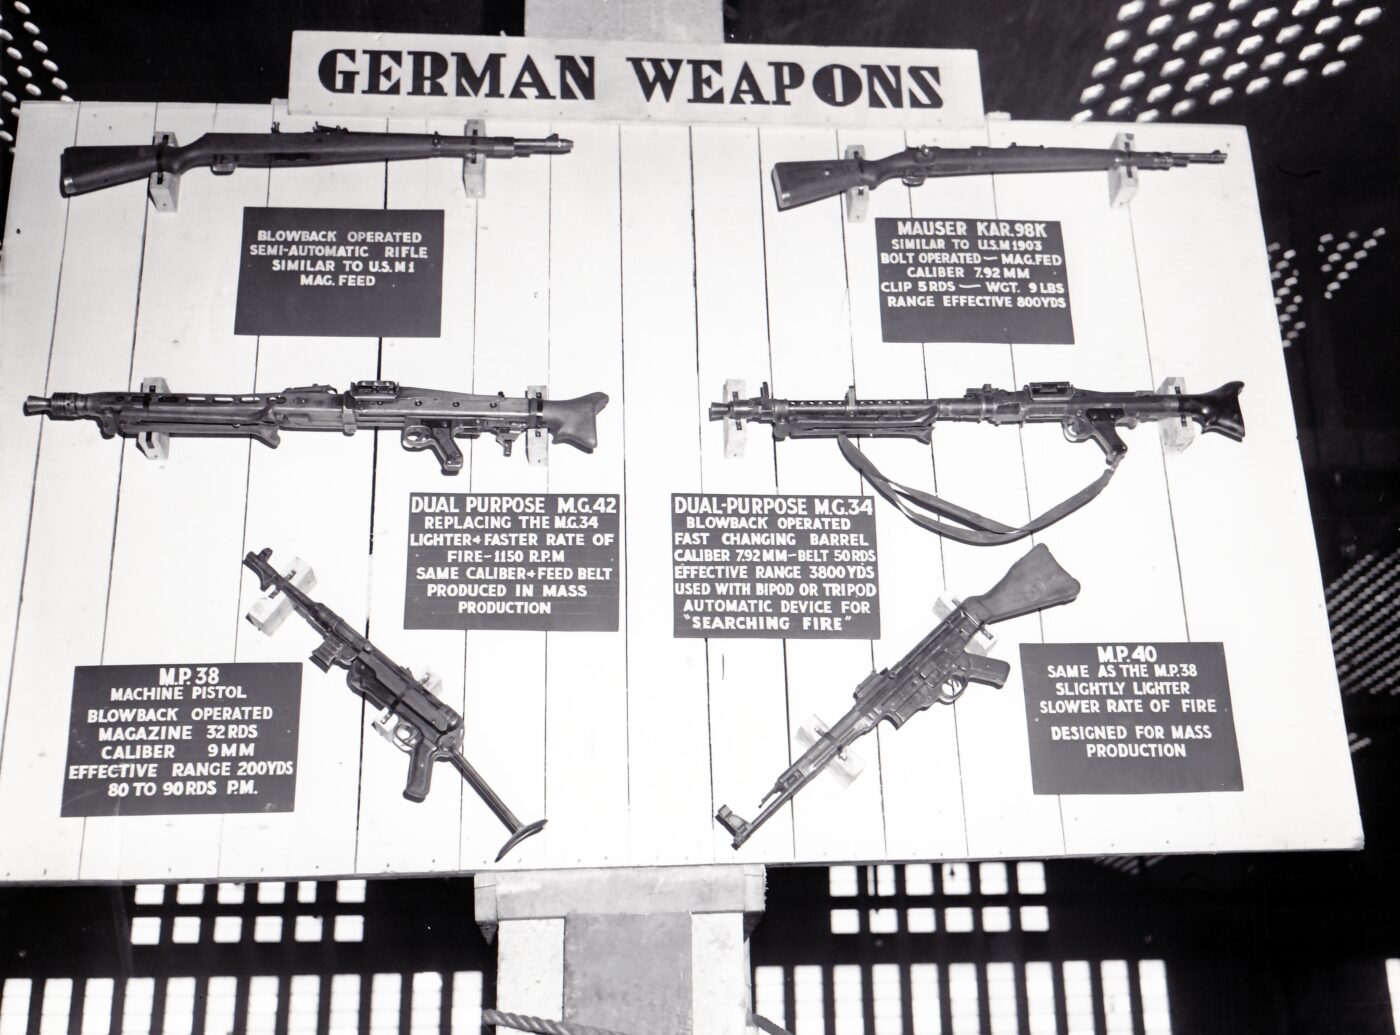 WWII German weapons display in France 1945